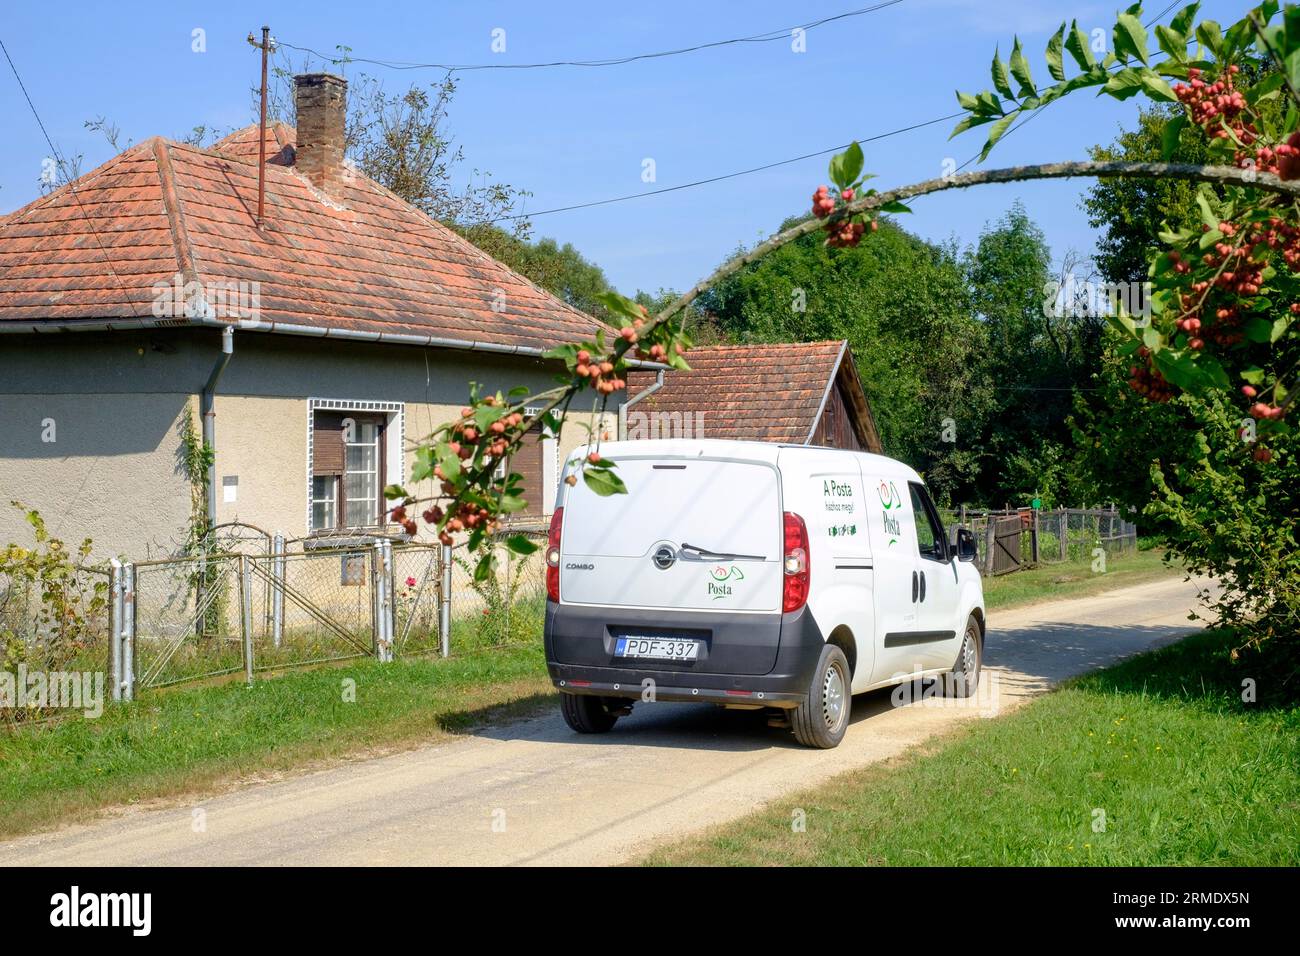 hungarian posta postal service mail delivery van rural countryside village lane hungary Stock Photo